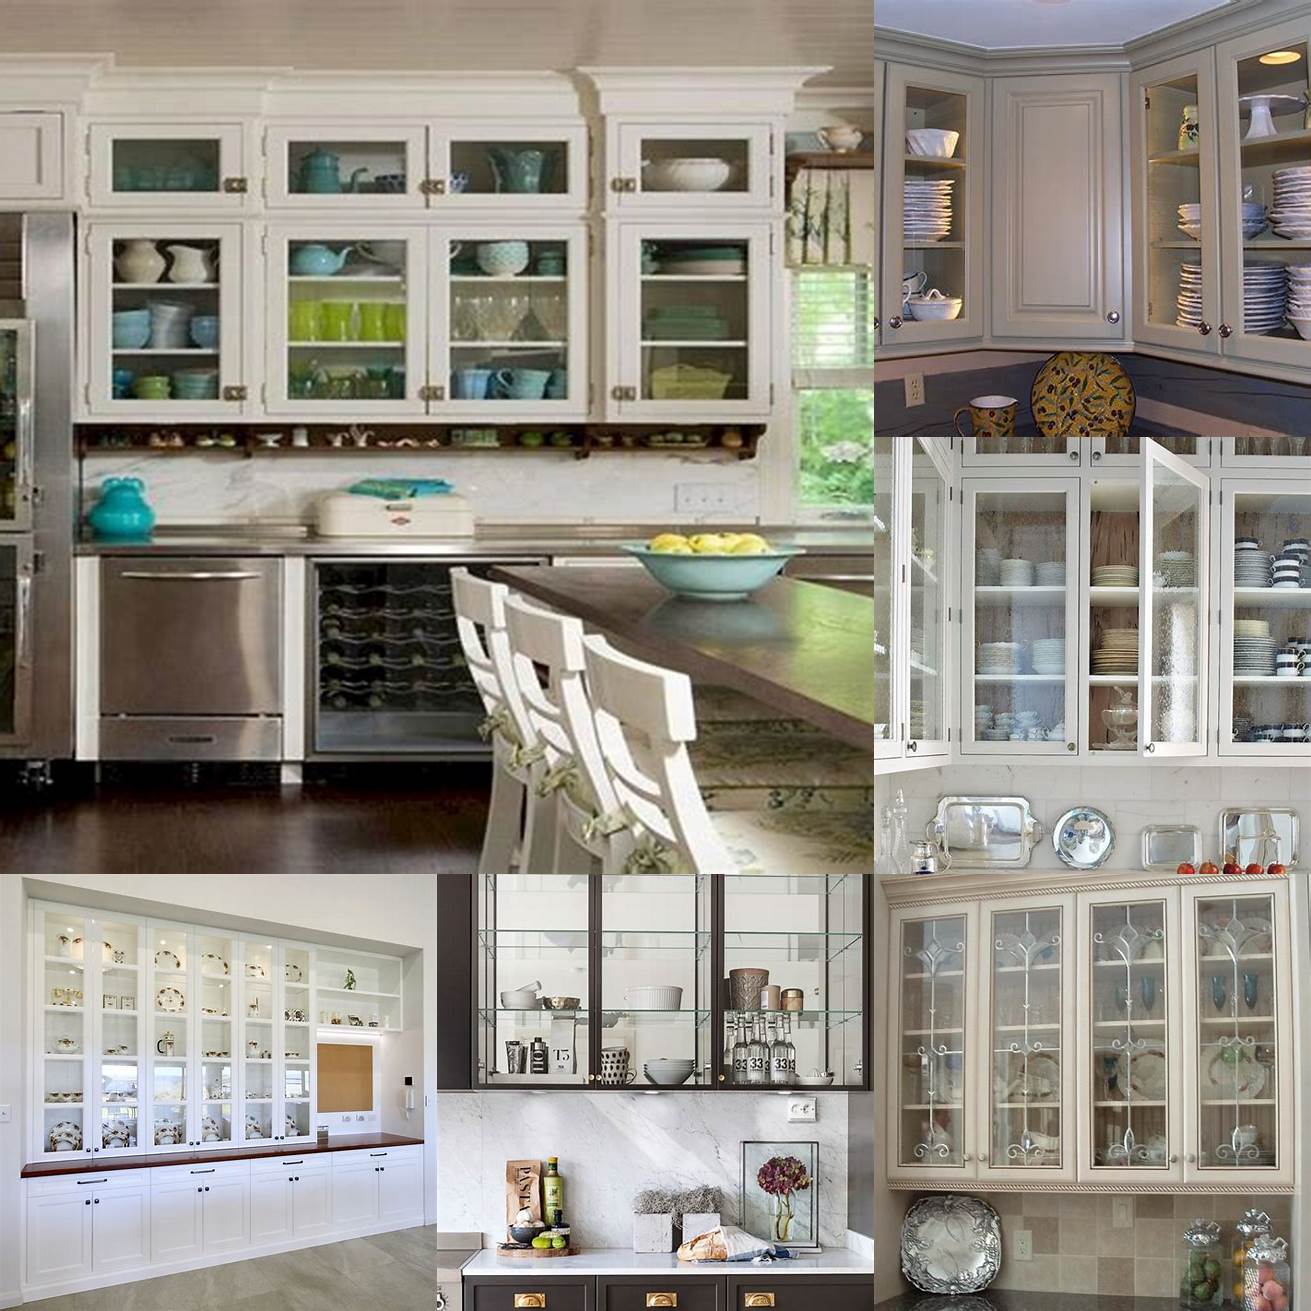 Sears kitchen cabinets with glass doors are perfect for displaying your favorite dishware and kitchen accessories